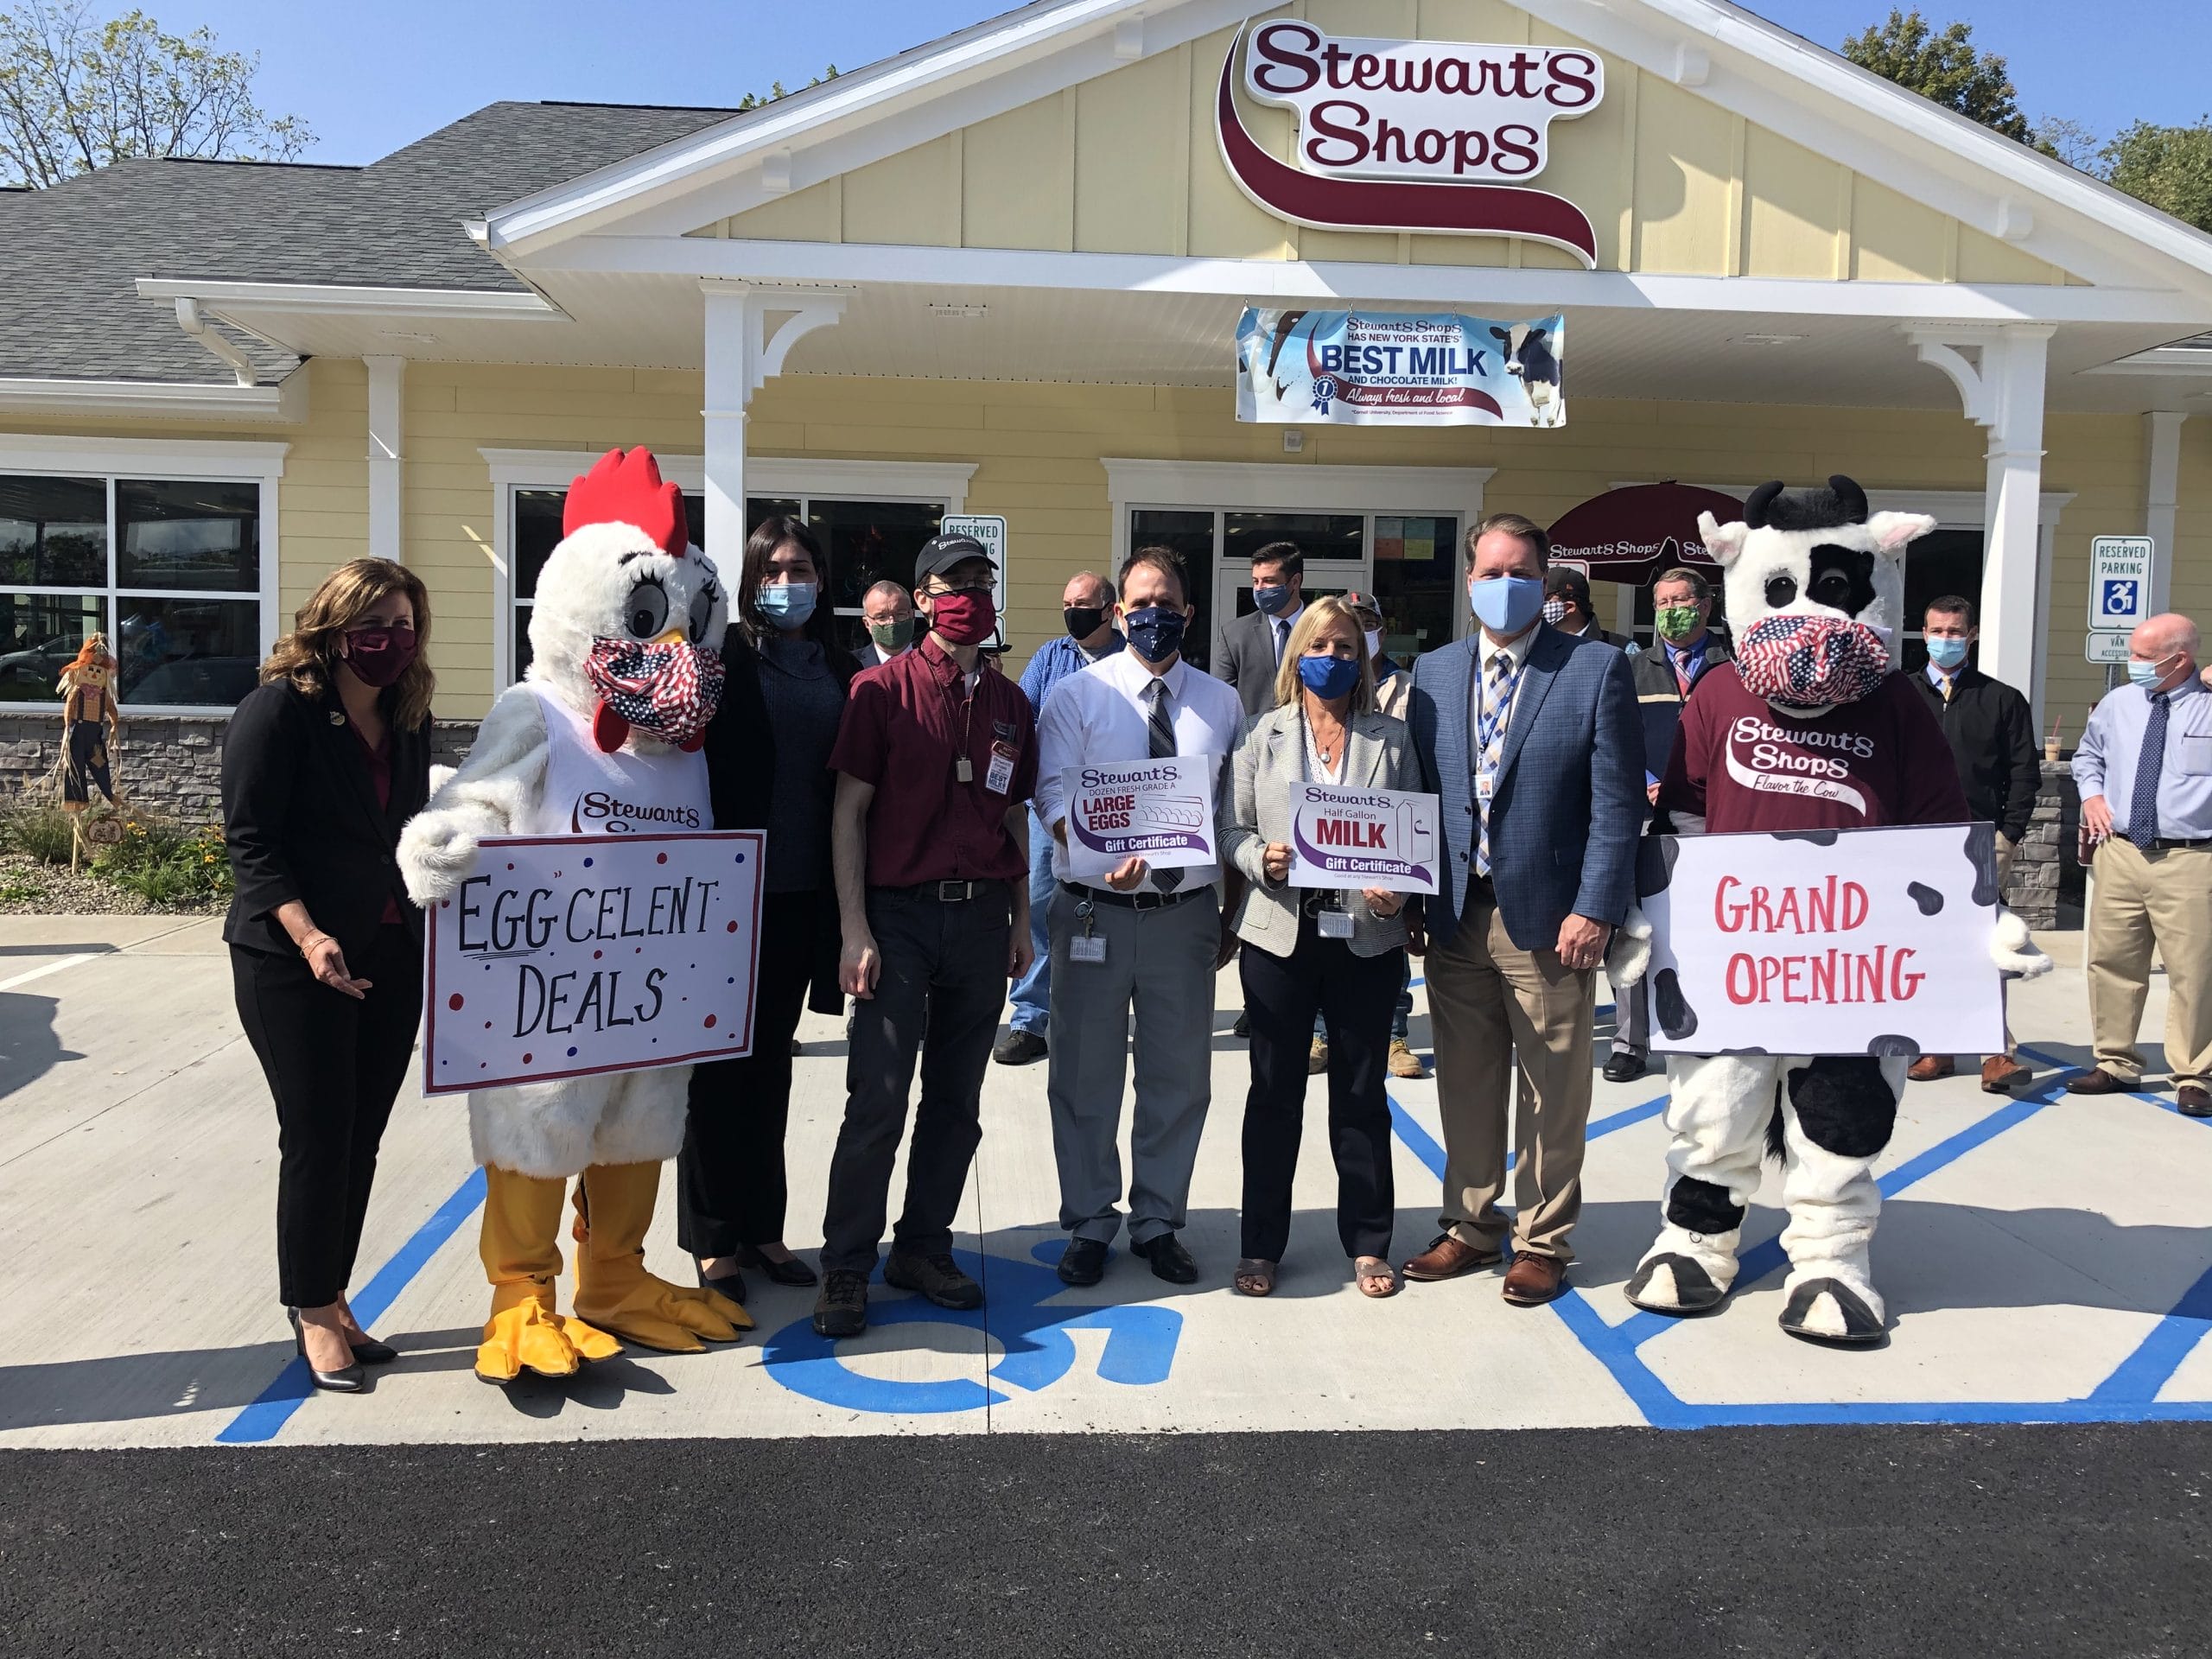 A group of people holding signs at a grand opening event at Stewarts. Eggcelent Deals, Large eggs, Milk, Grand Opening.